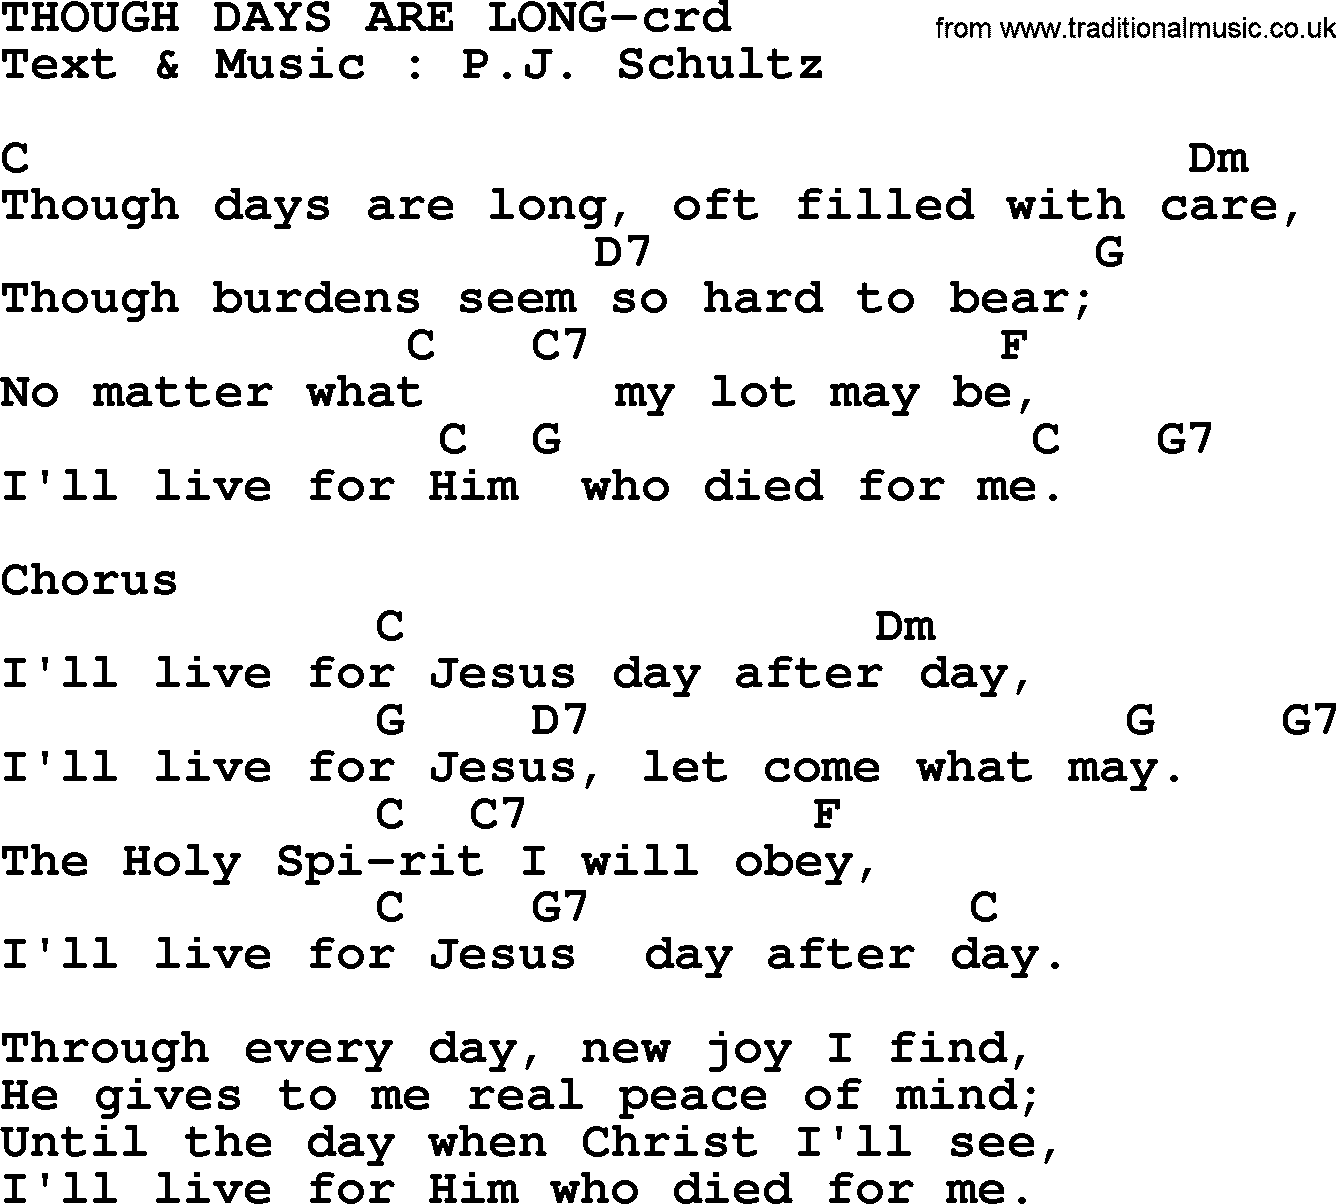 Top 500 Hymn: Though Days Are Long, lyrics and chords